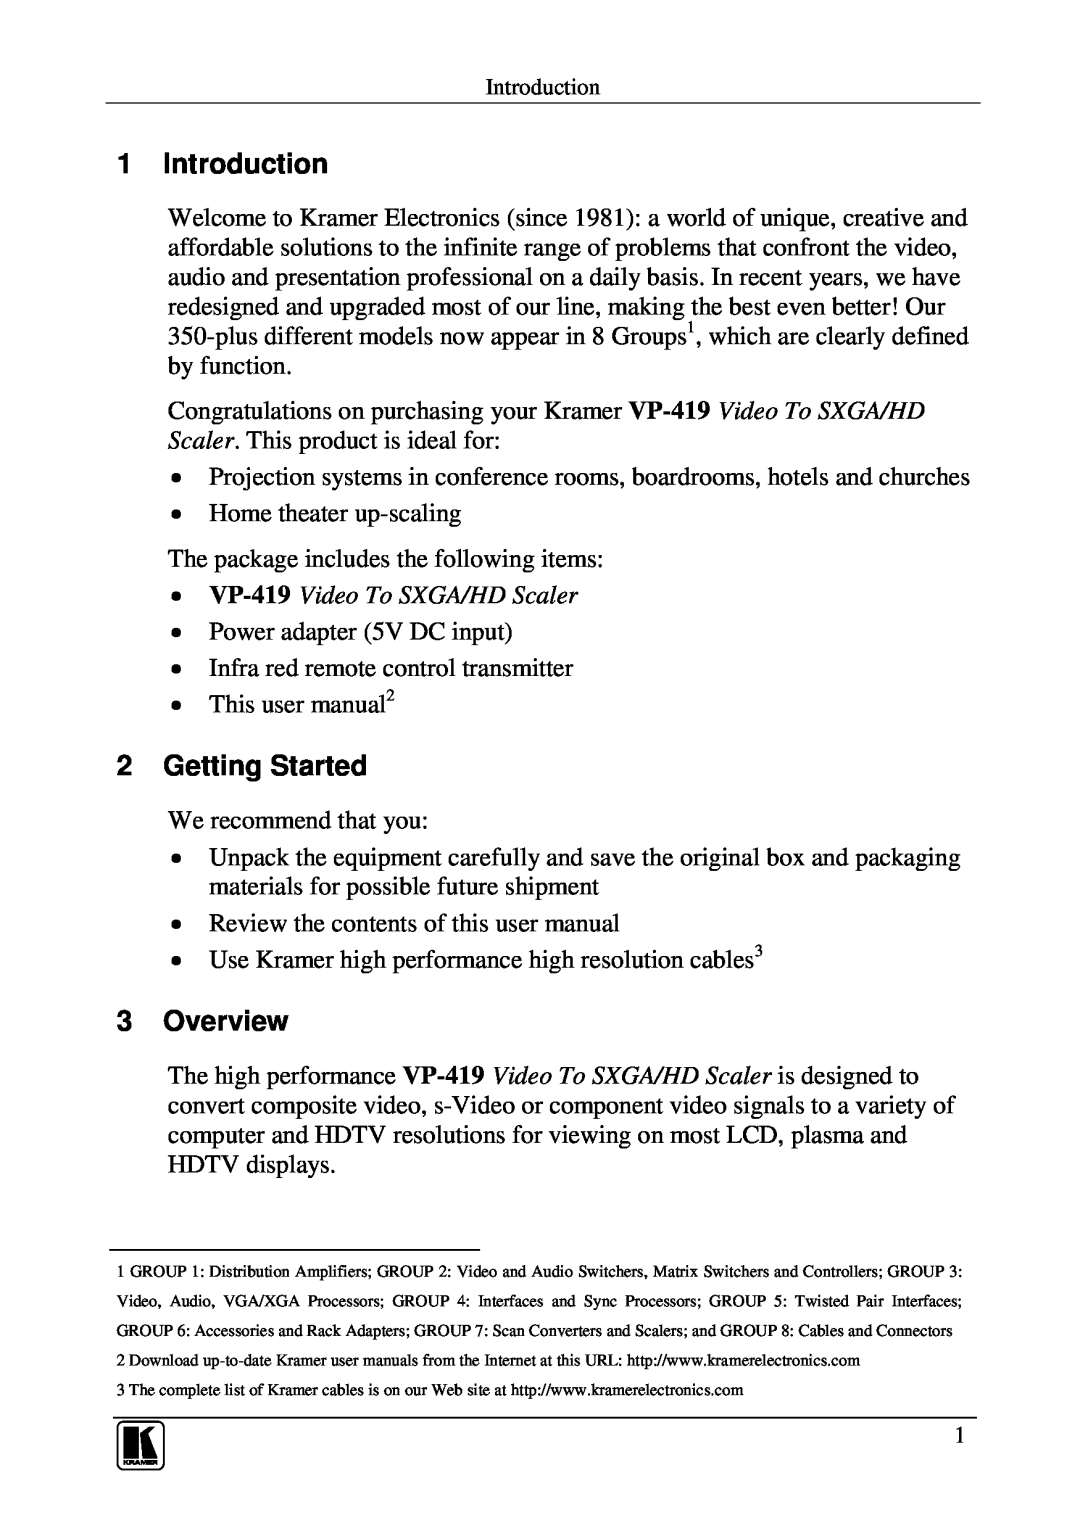 Kramer Electronics user manual Introduction, Getting Started, Overview, VP-419 Video To SXGA/HD Scaler 